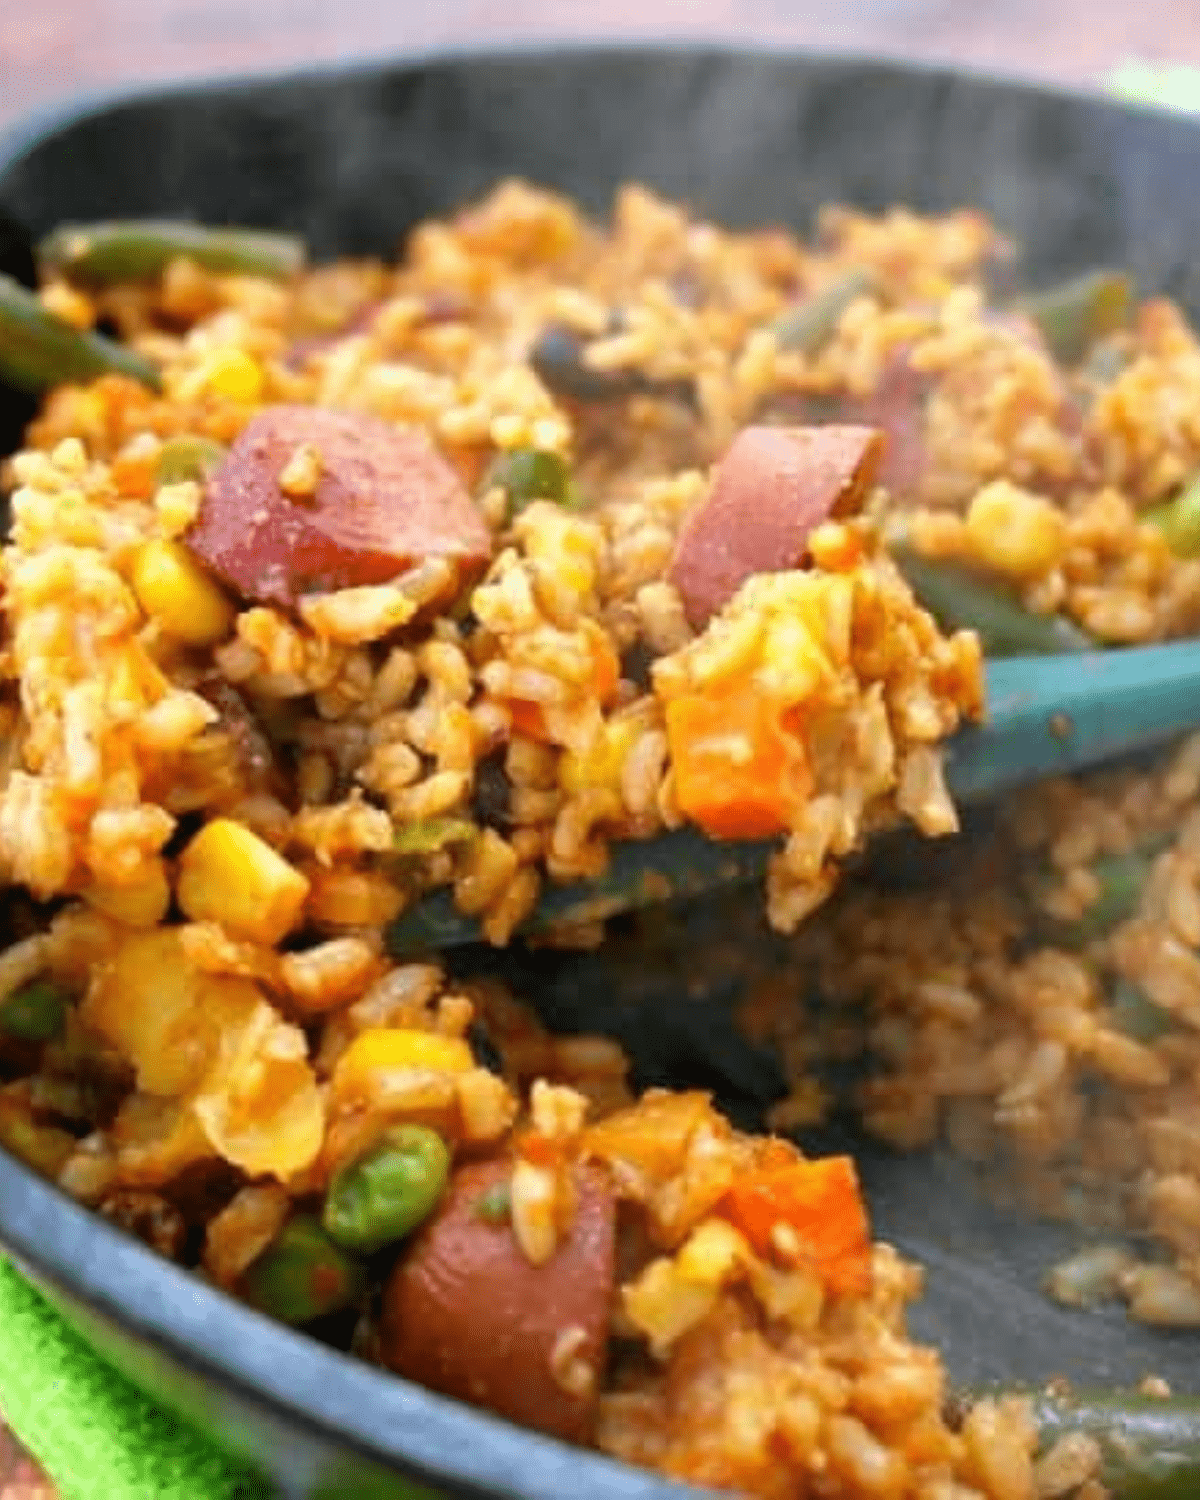 Smoked sausage, rice and veggies in a skillet with a spoon